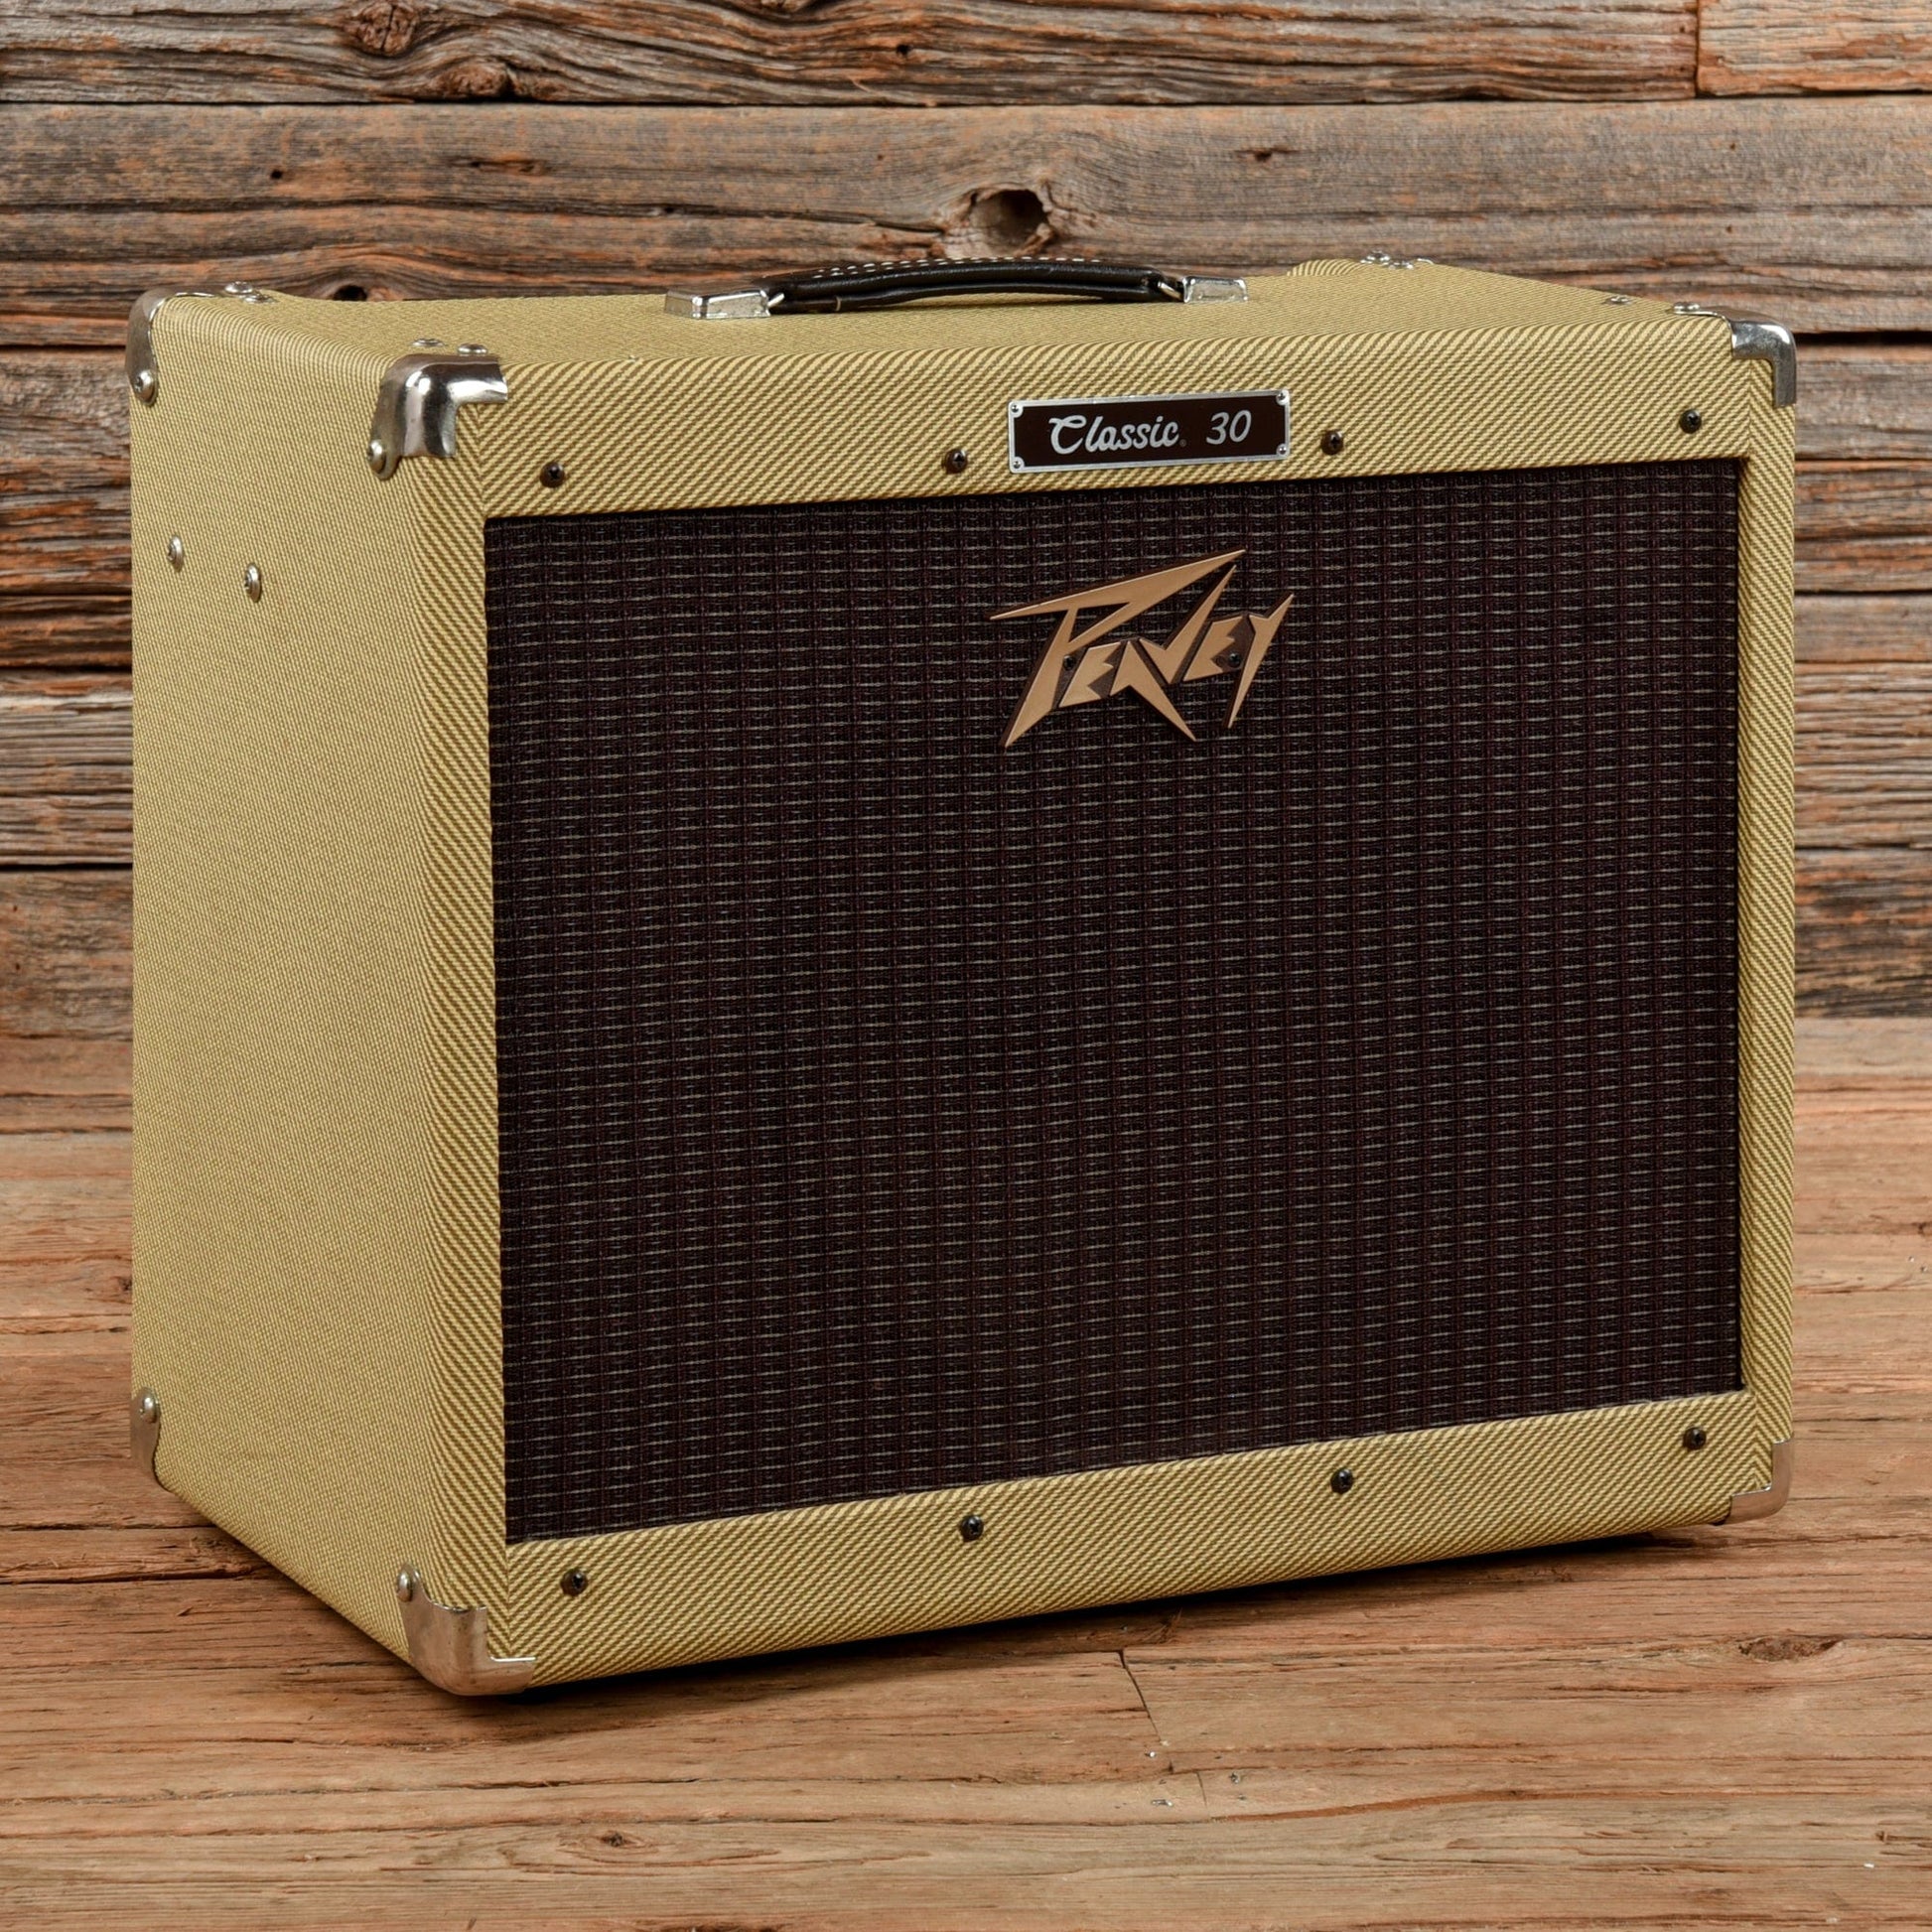 Peavey Classic 30 1x12 Guitar Combo Amps / Guitar Cabinets